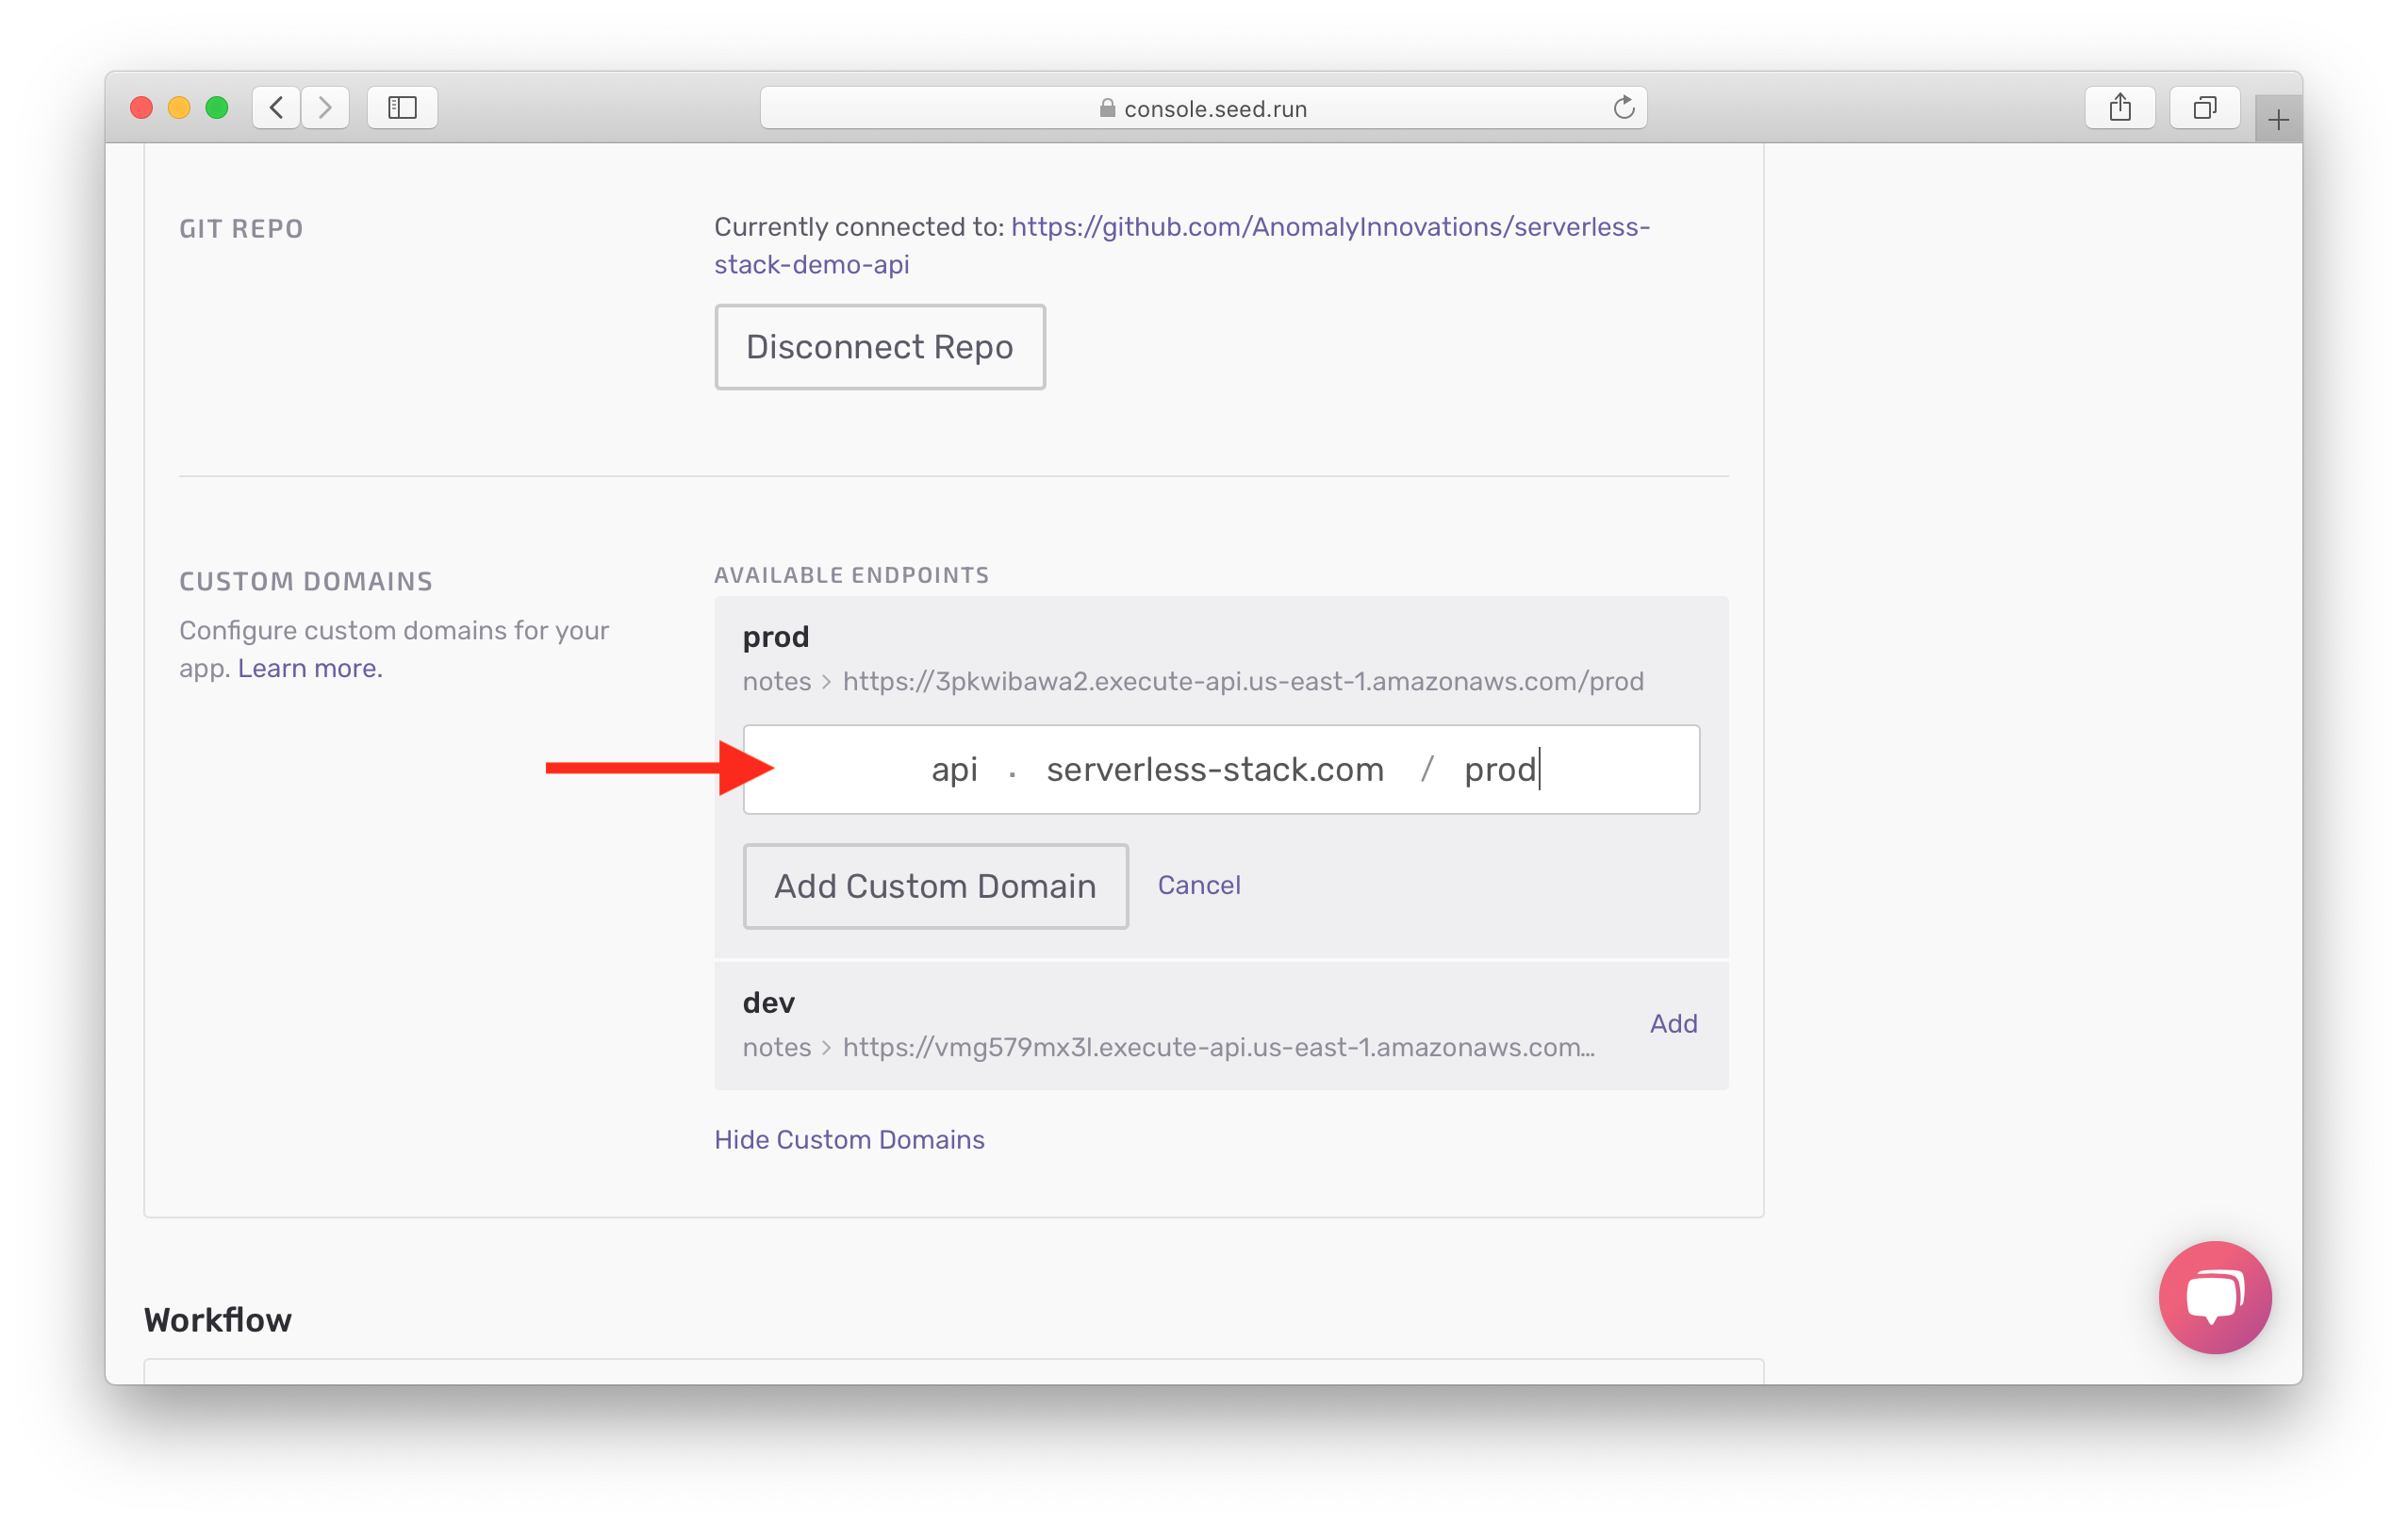 Click Add Custom Domain button for prod endpoint